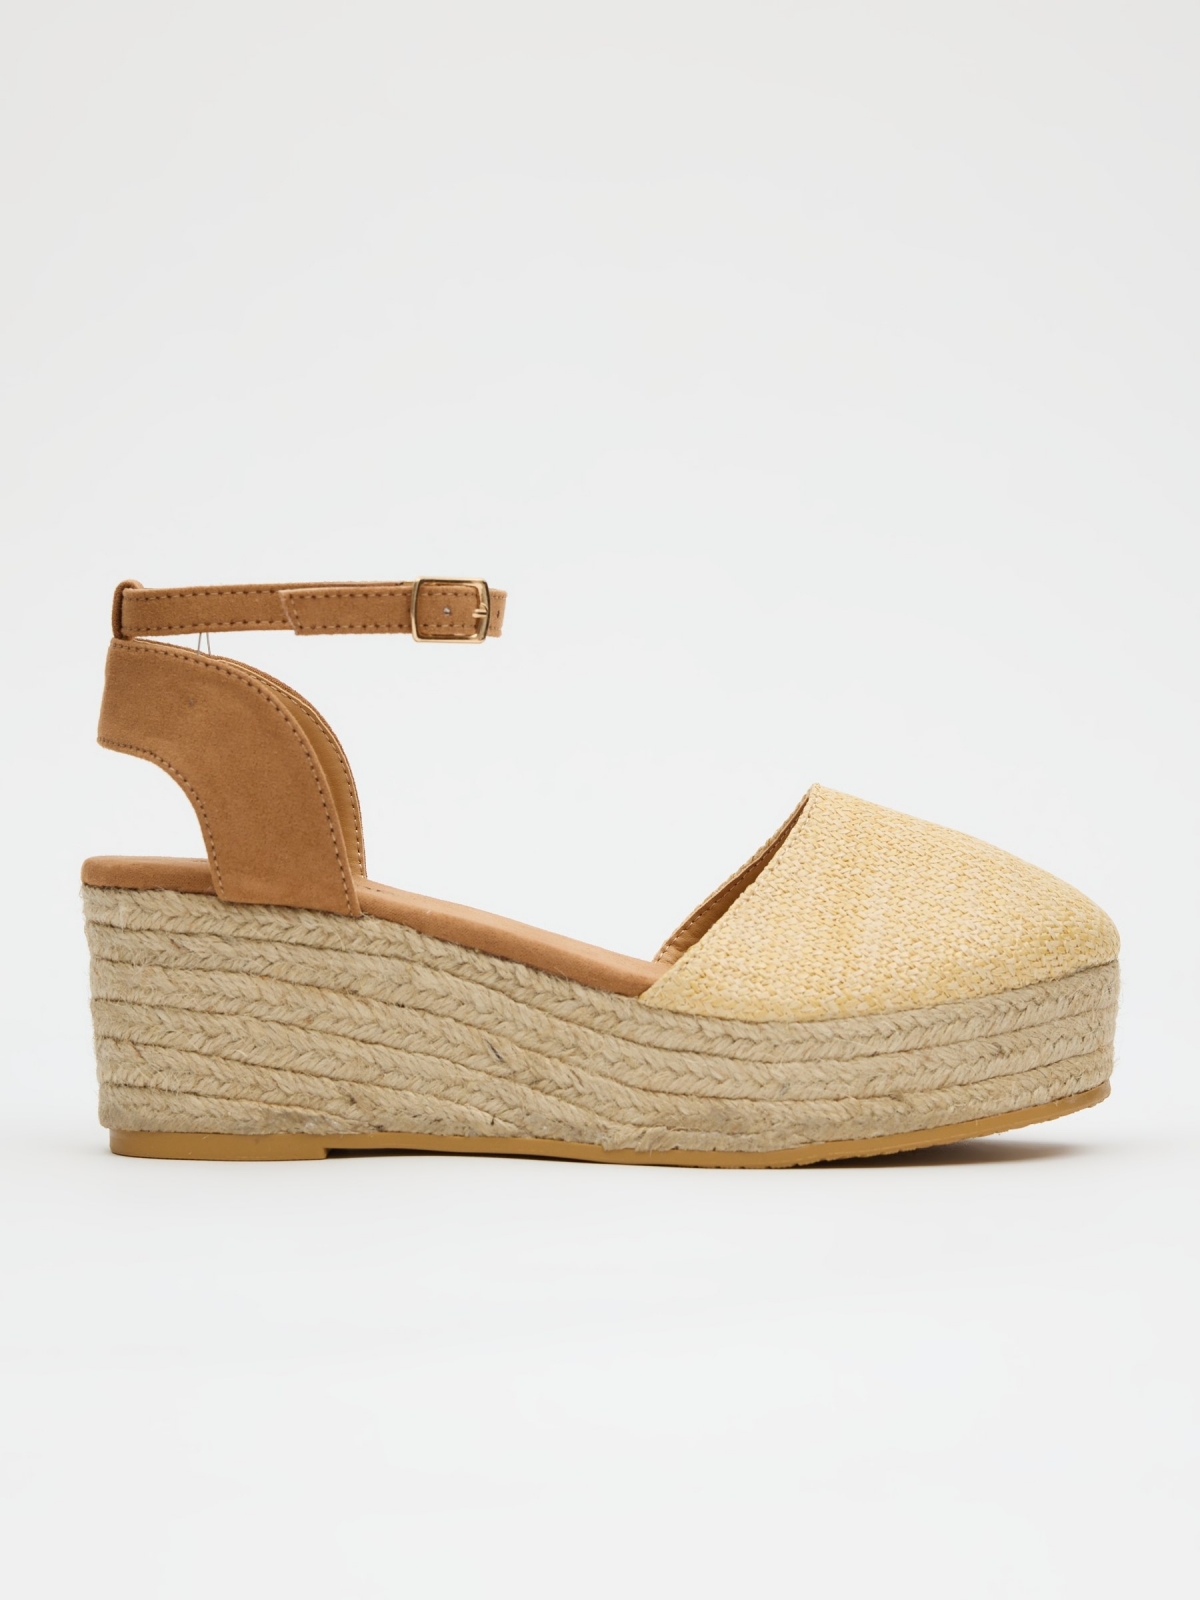 Clog style wedge sandal off white